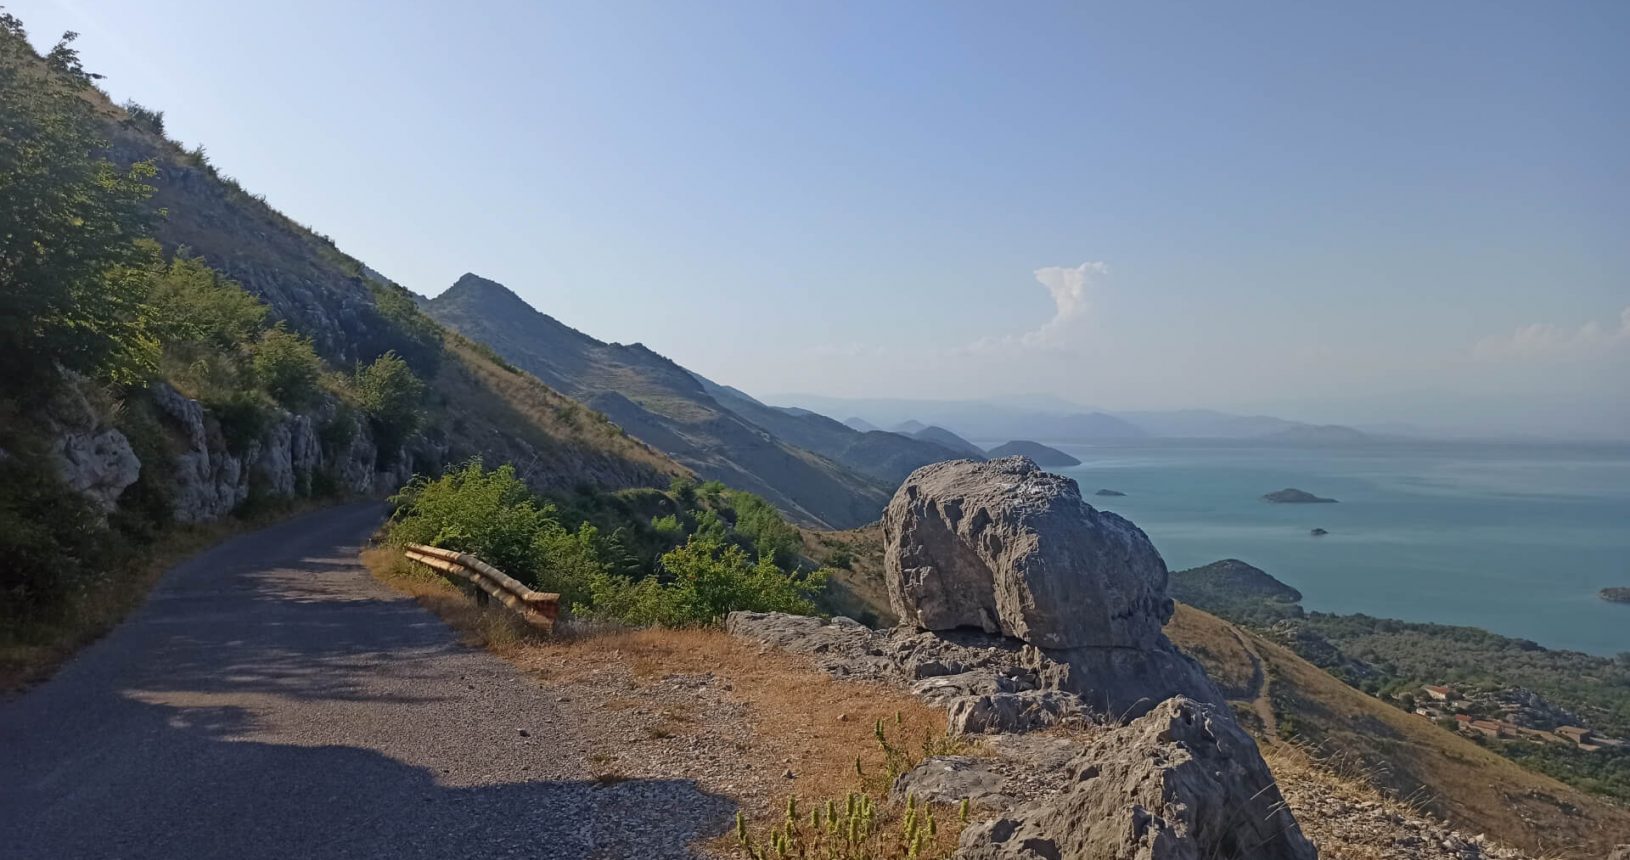 Exceptional landscape view at Skadar lake